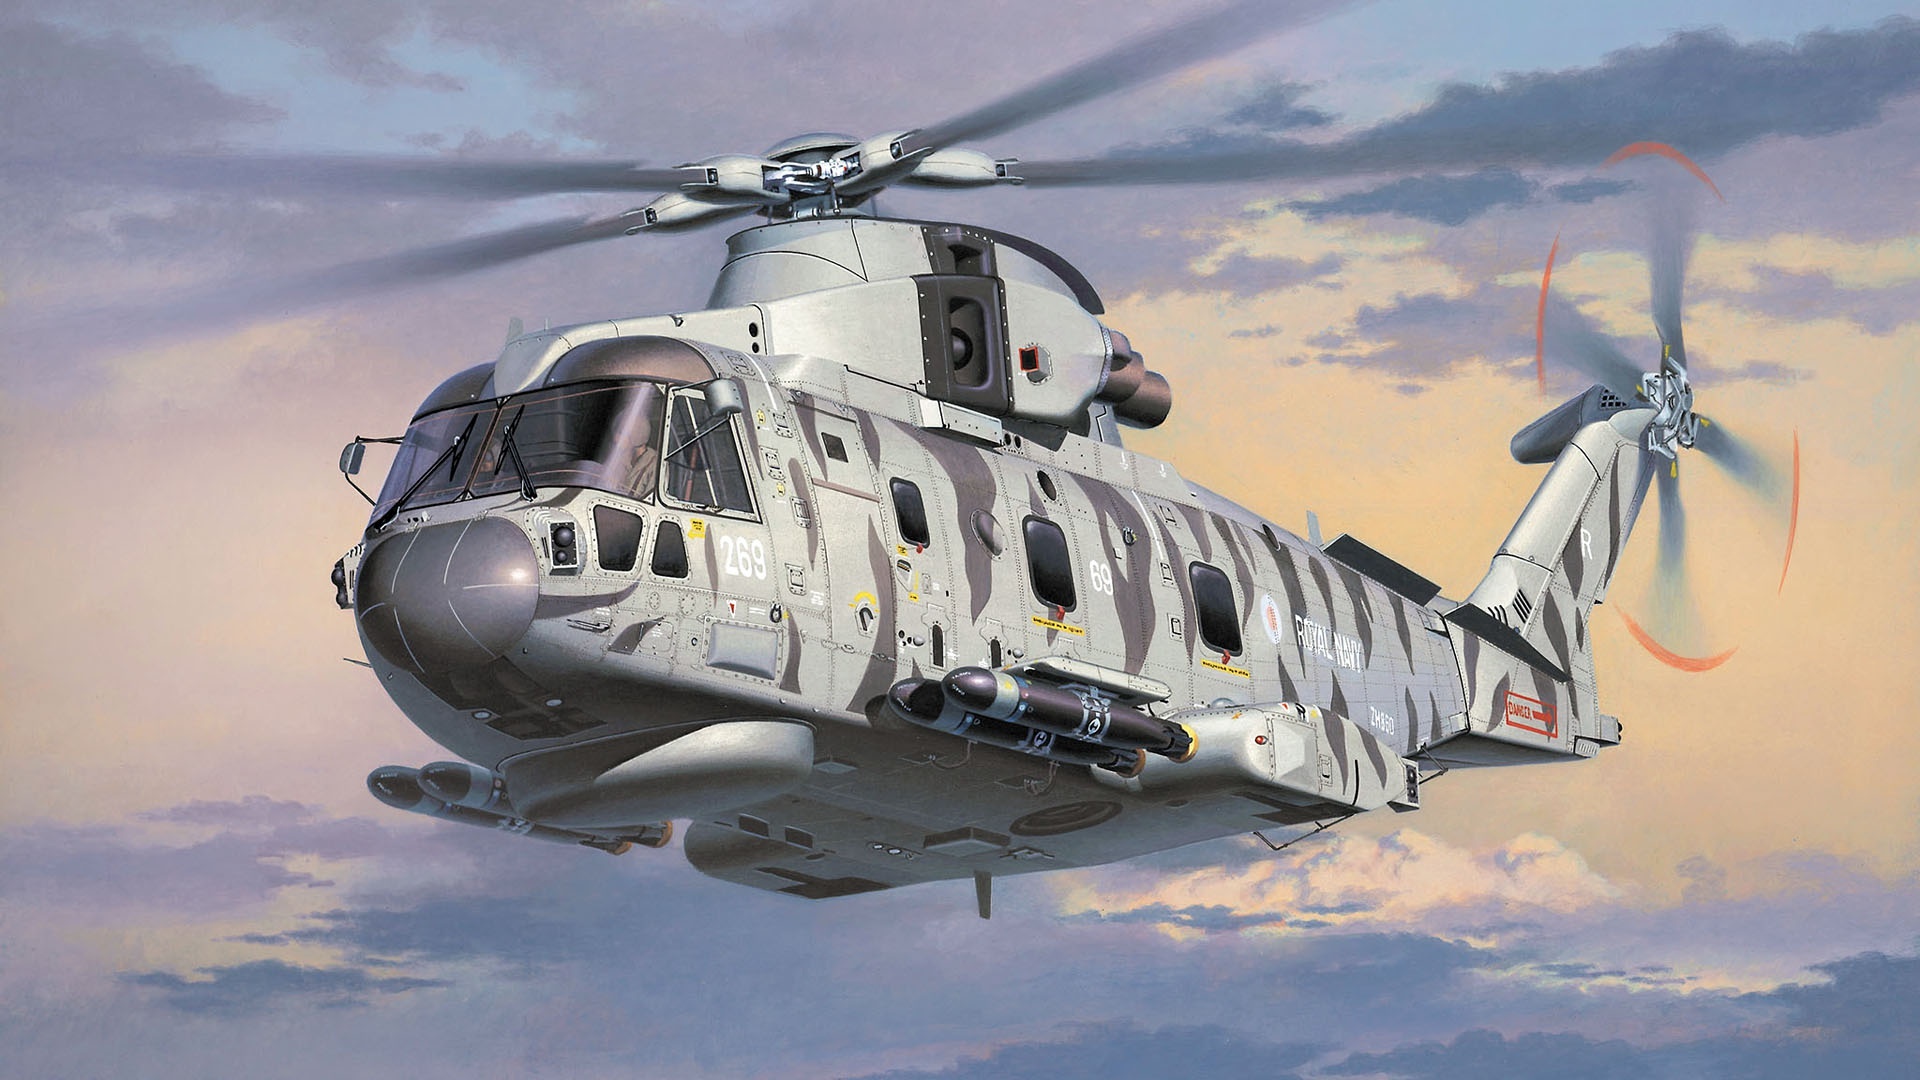 AgustaWestland AW101 HD Wallpapers and Backgrounds 1920x1080